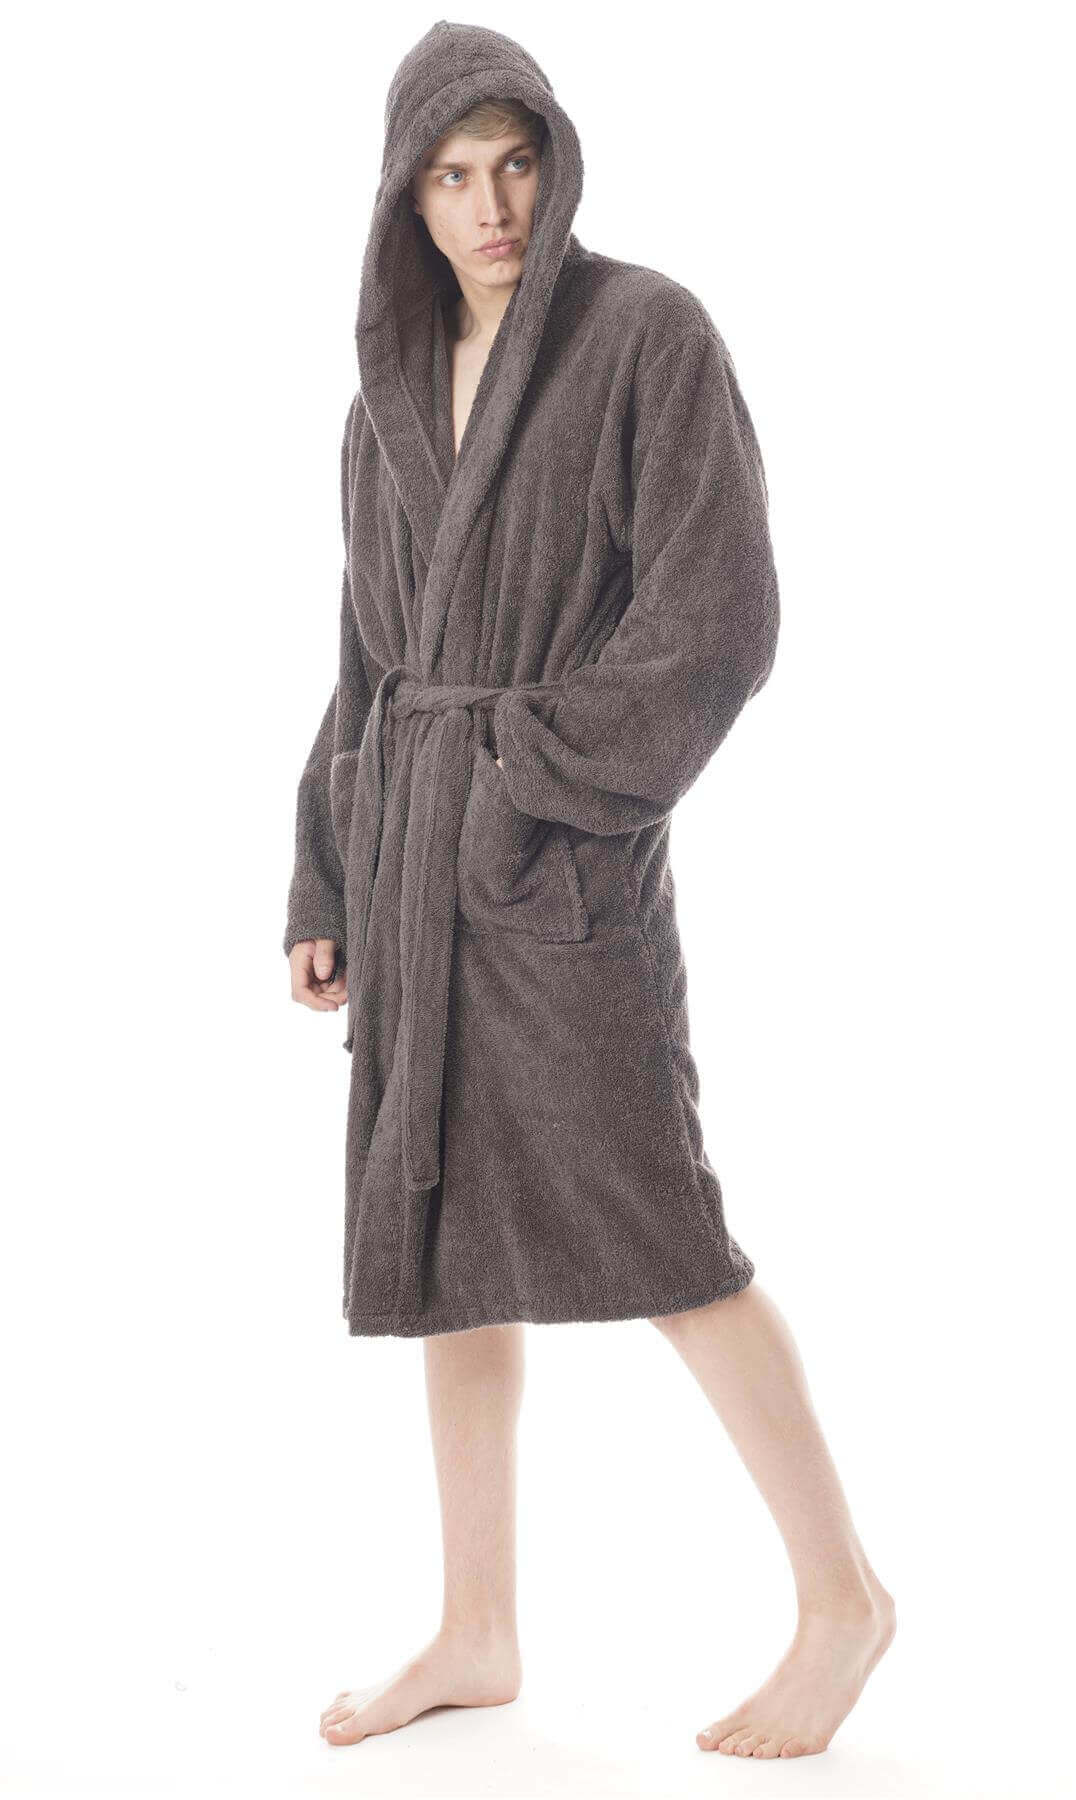 Men's Hooded Robe Super Soft Long Terry Towelling Bathrobe Dressing Gown. Buy now for £15.00. A Robe by Toro Rocco. assorted, bathrobe, black, charcoal, comfortable, cotton, dressing gown, fleece, gym, hooded, hoodie, hotel, large, loungewear, medium, men